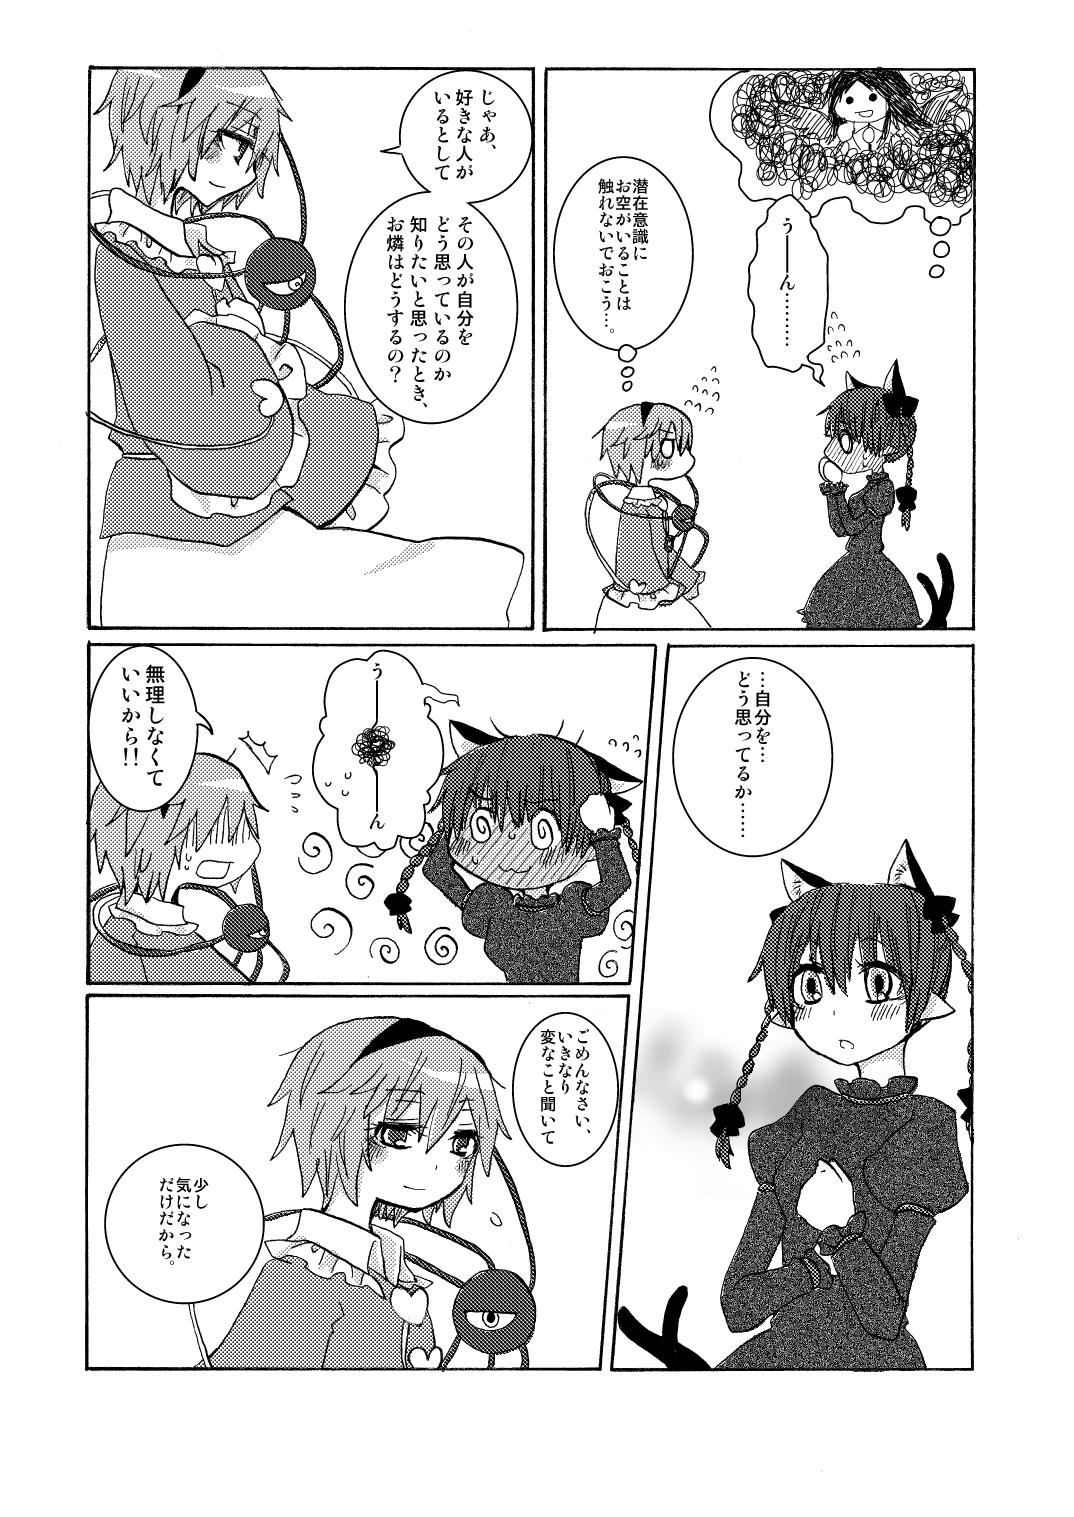 Brunet Over. the story of unclenched hearts - Touhou project Gay Averagedick - Page 11